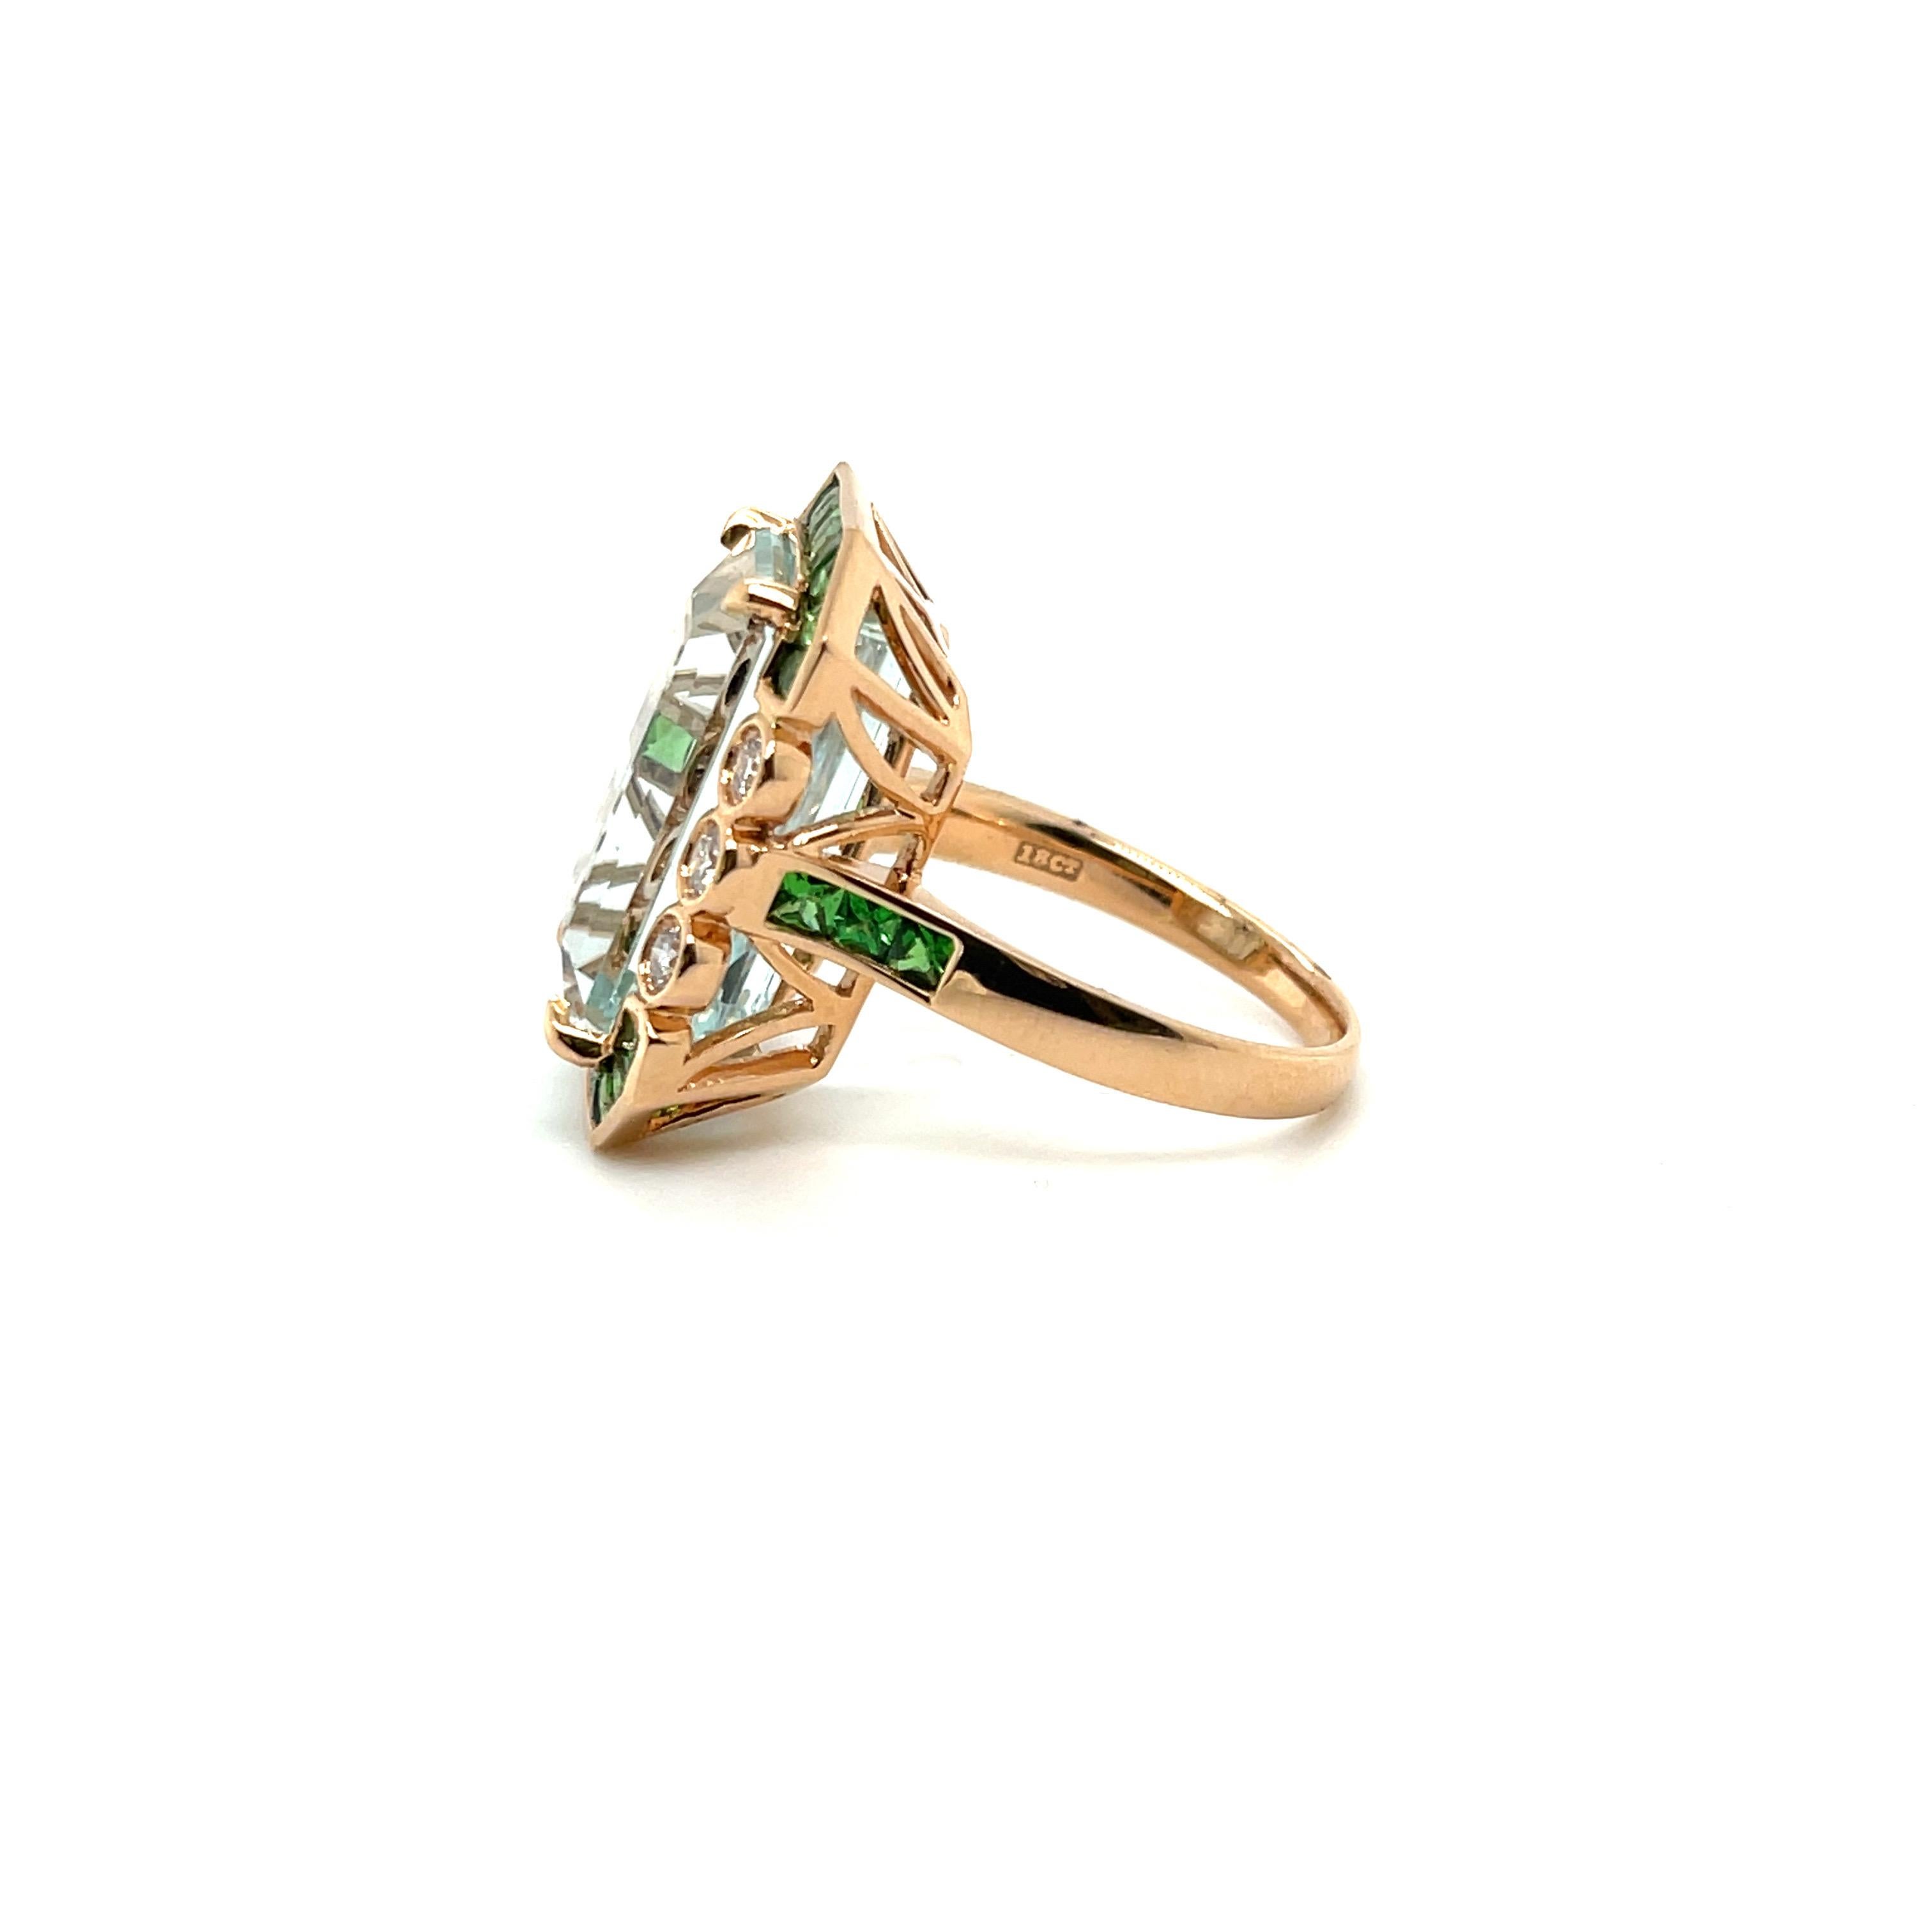 Heirloom Aquamarine, Tsavorite Garnet and Diamond ring, gorgeously crafted in eighteen karat rose gold, complimented by a stunning polished finish design. 


Item: One stamped 18CT rose gold Aquamarine, Garnet and diamond cocktail ring